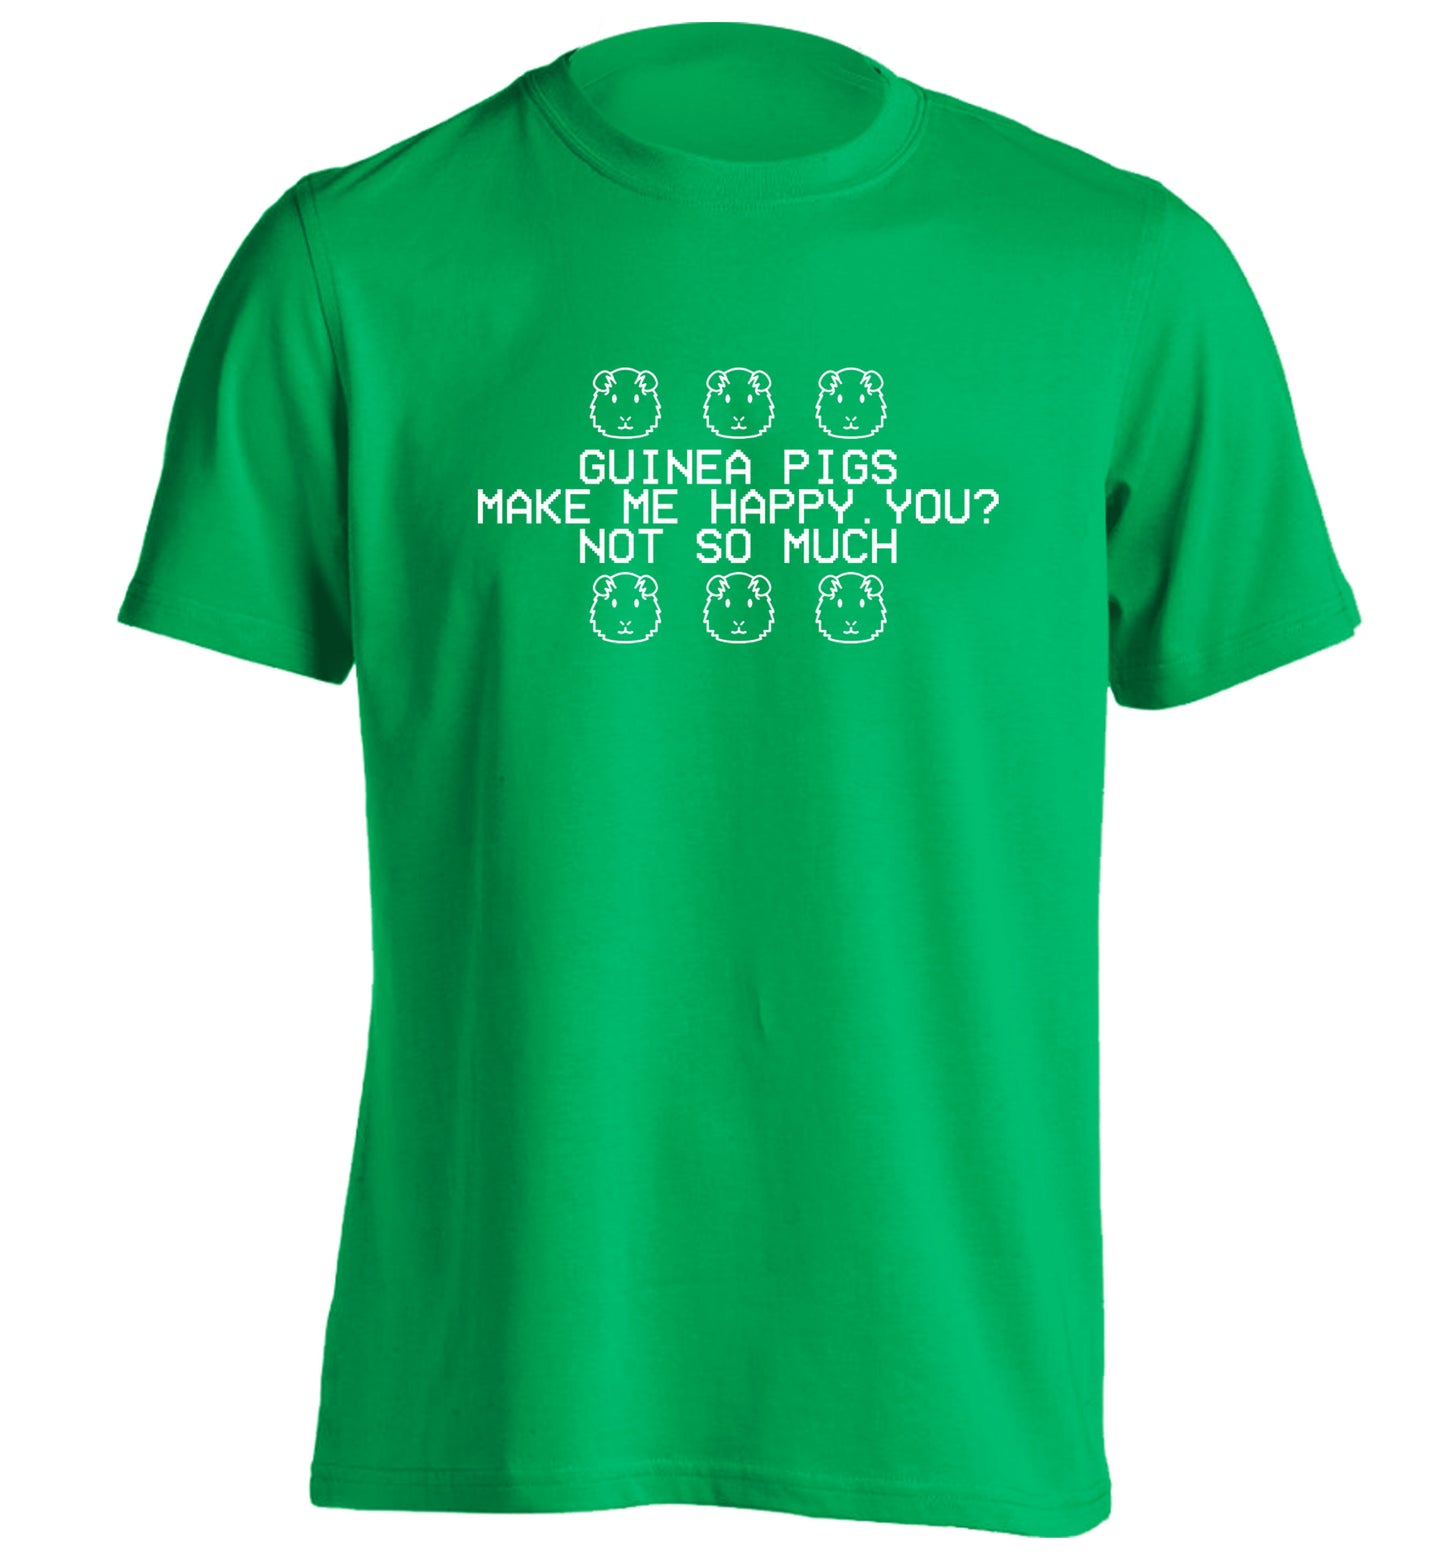 Guinea pigs make me happy, you not so much adults unisex green Tshirt 2XL